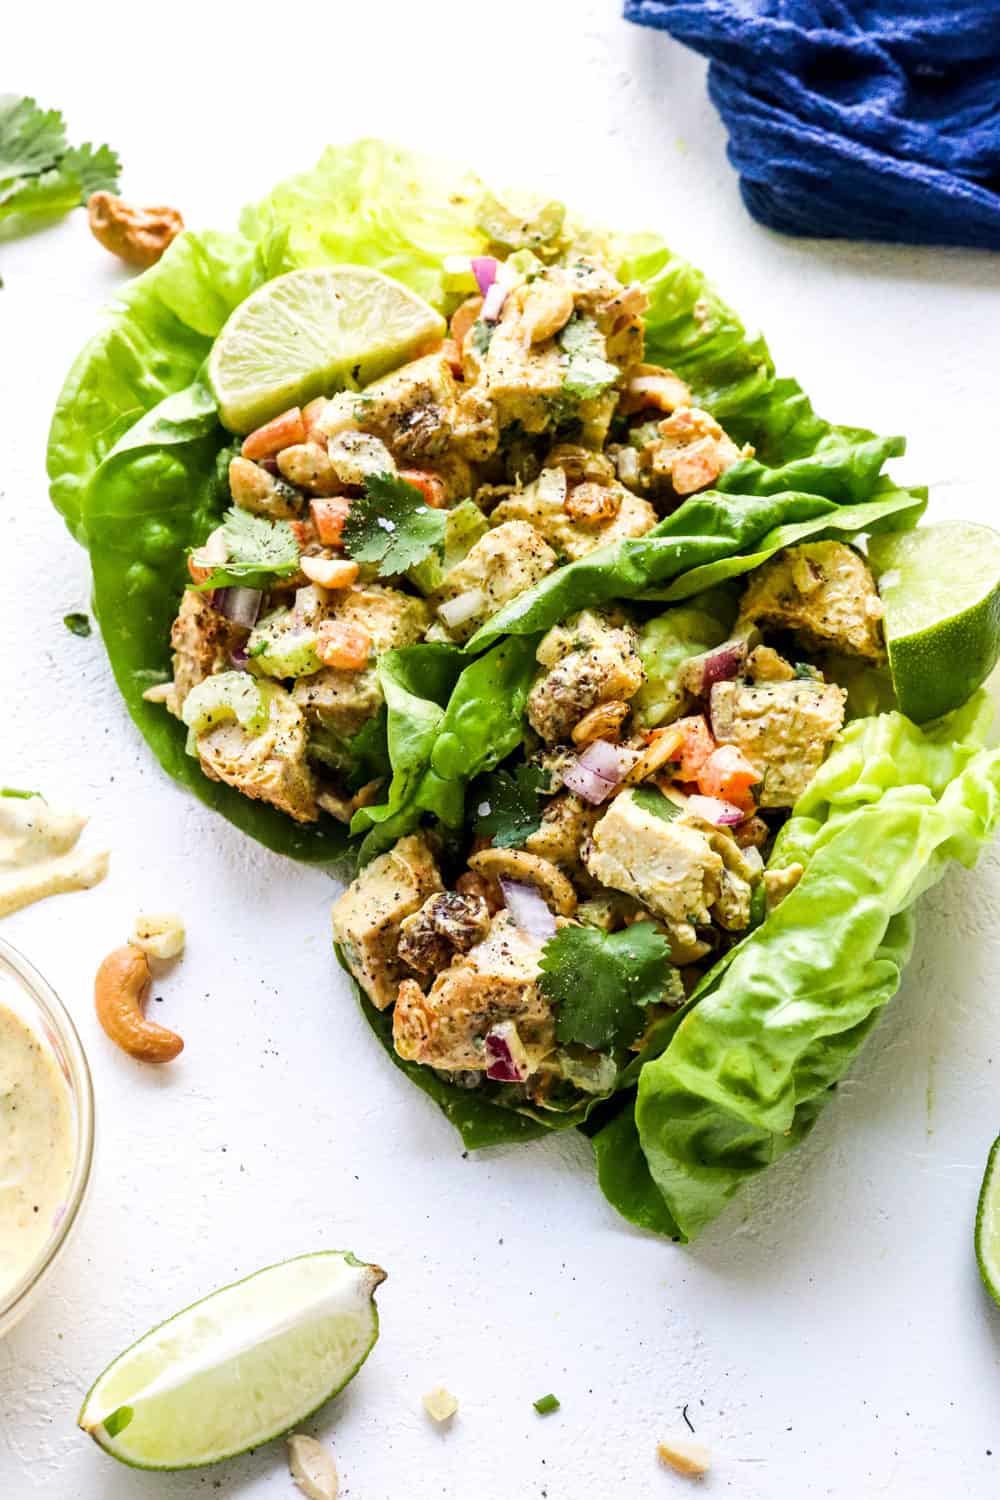 Lettuce cups filled with healthy creamy chicken salad on a white surface